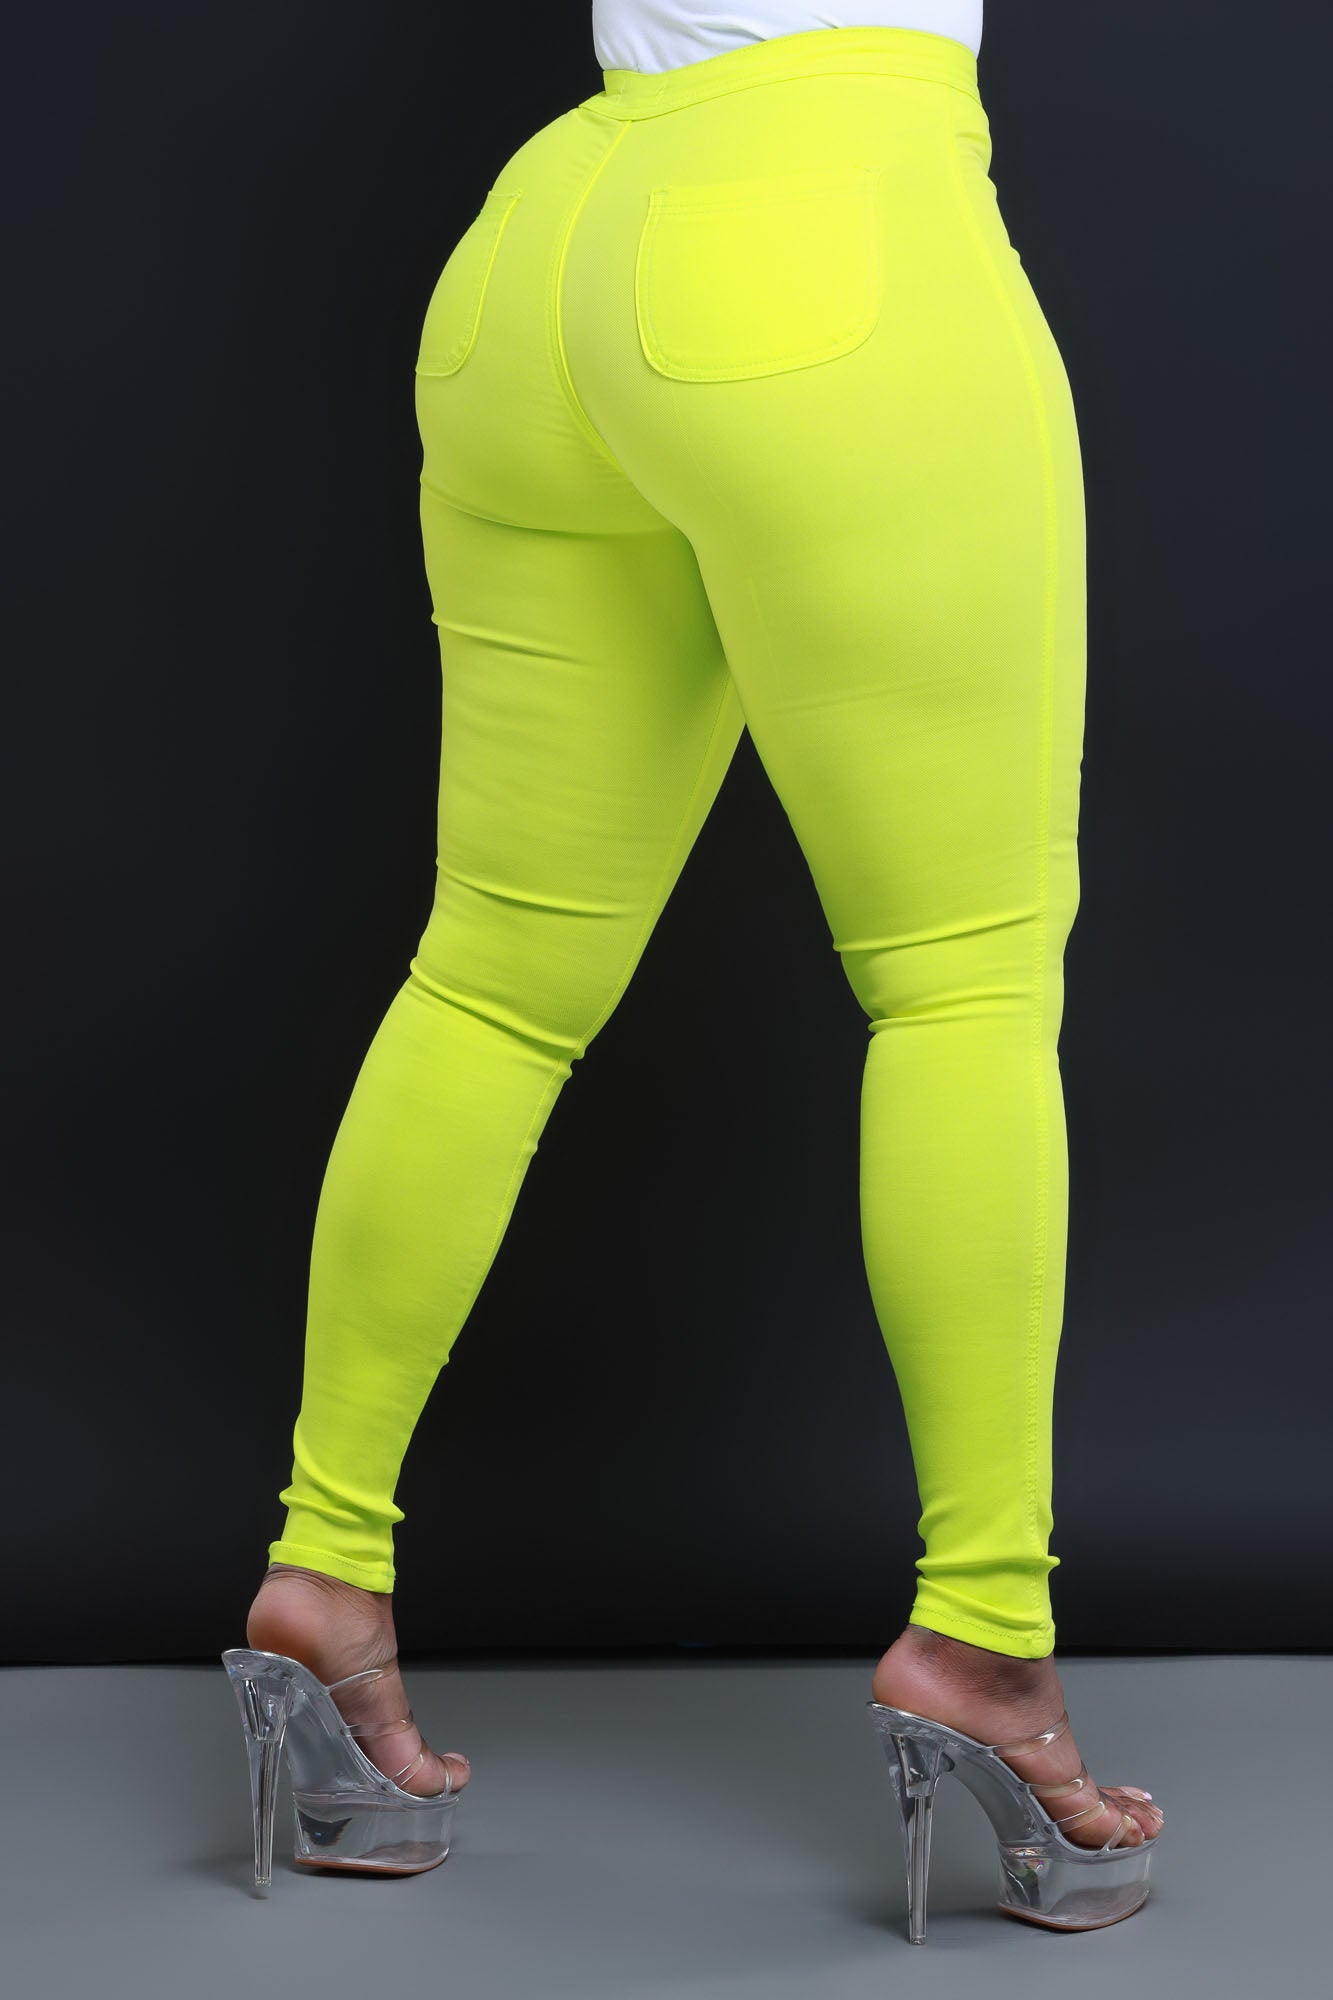 Super Green Fluo – Green Fluo Tights